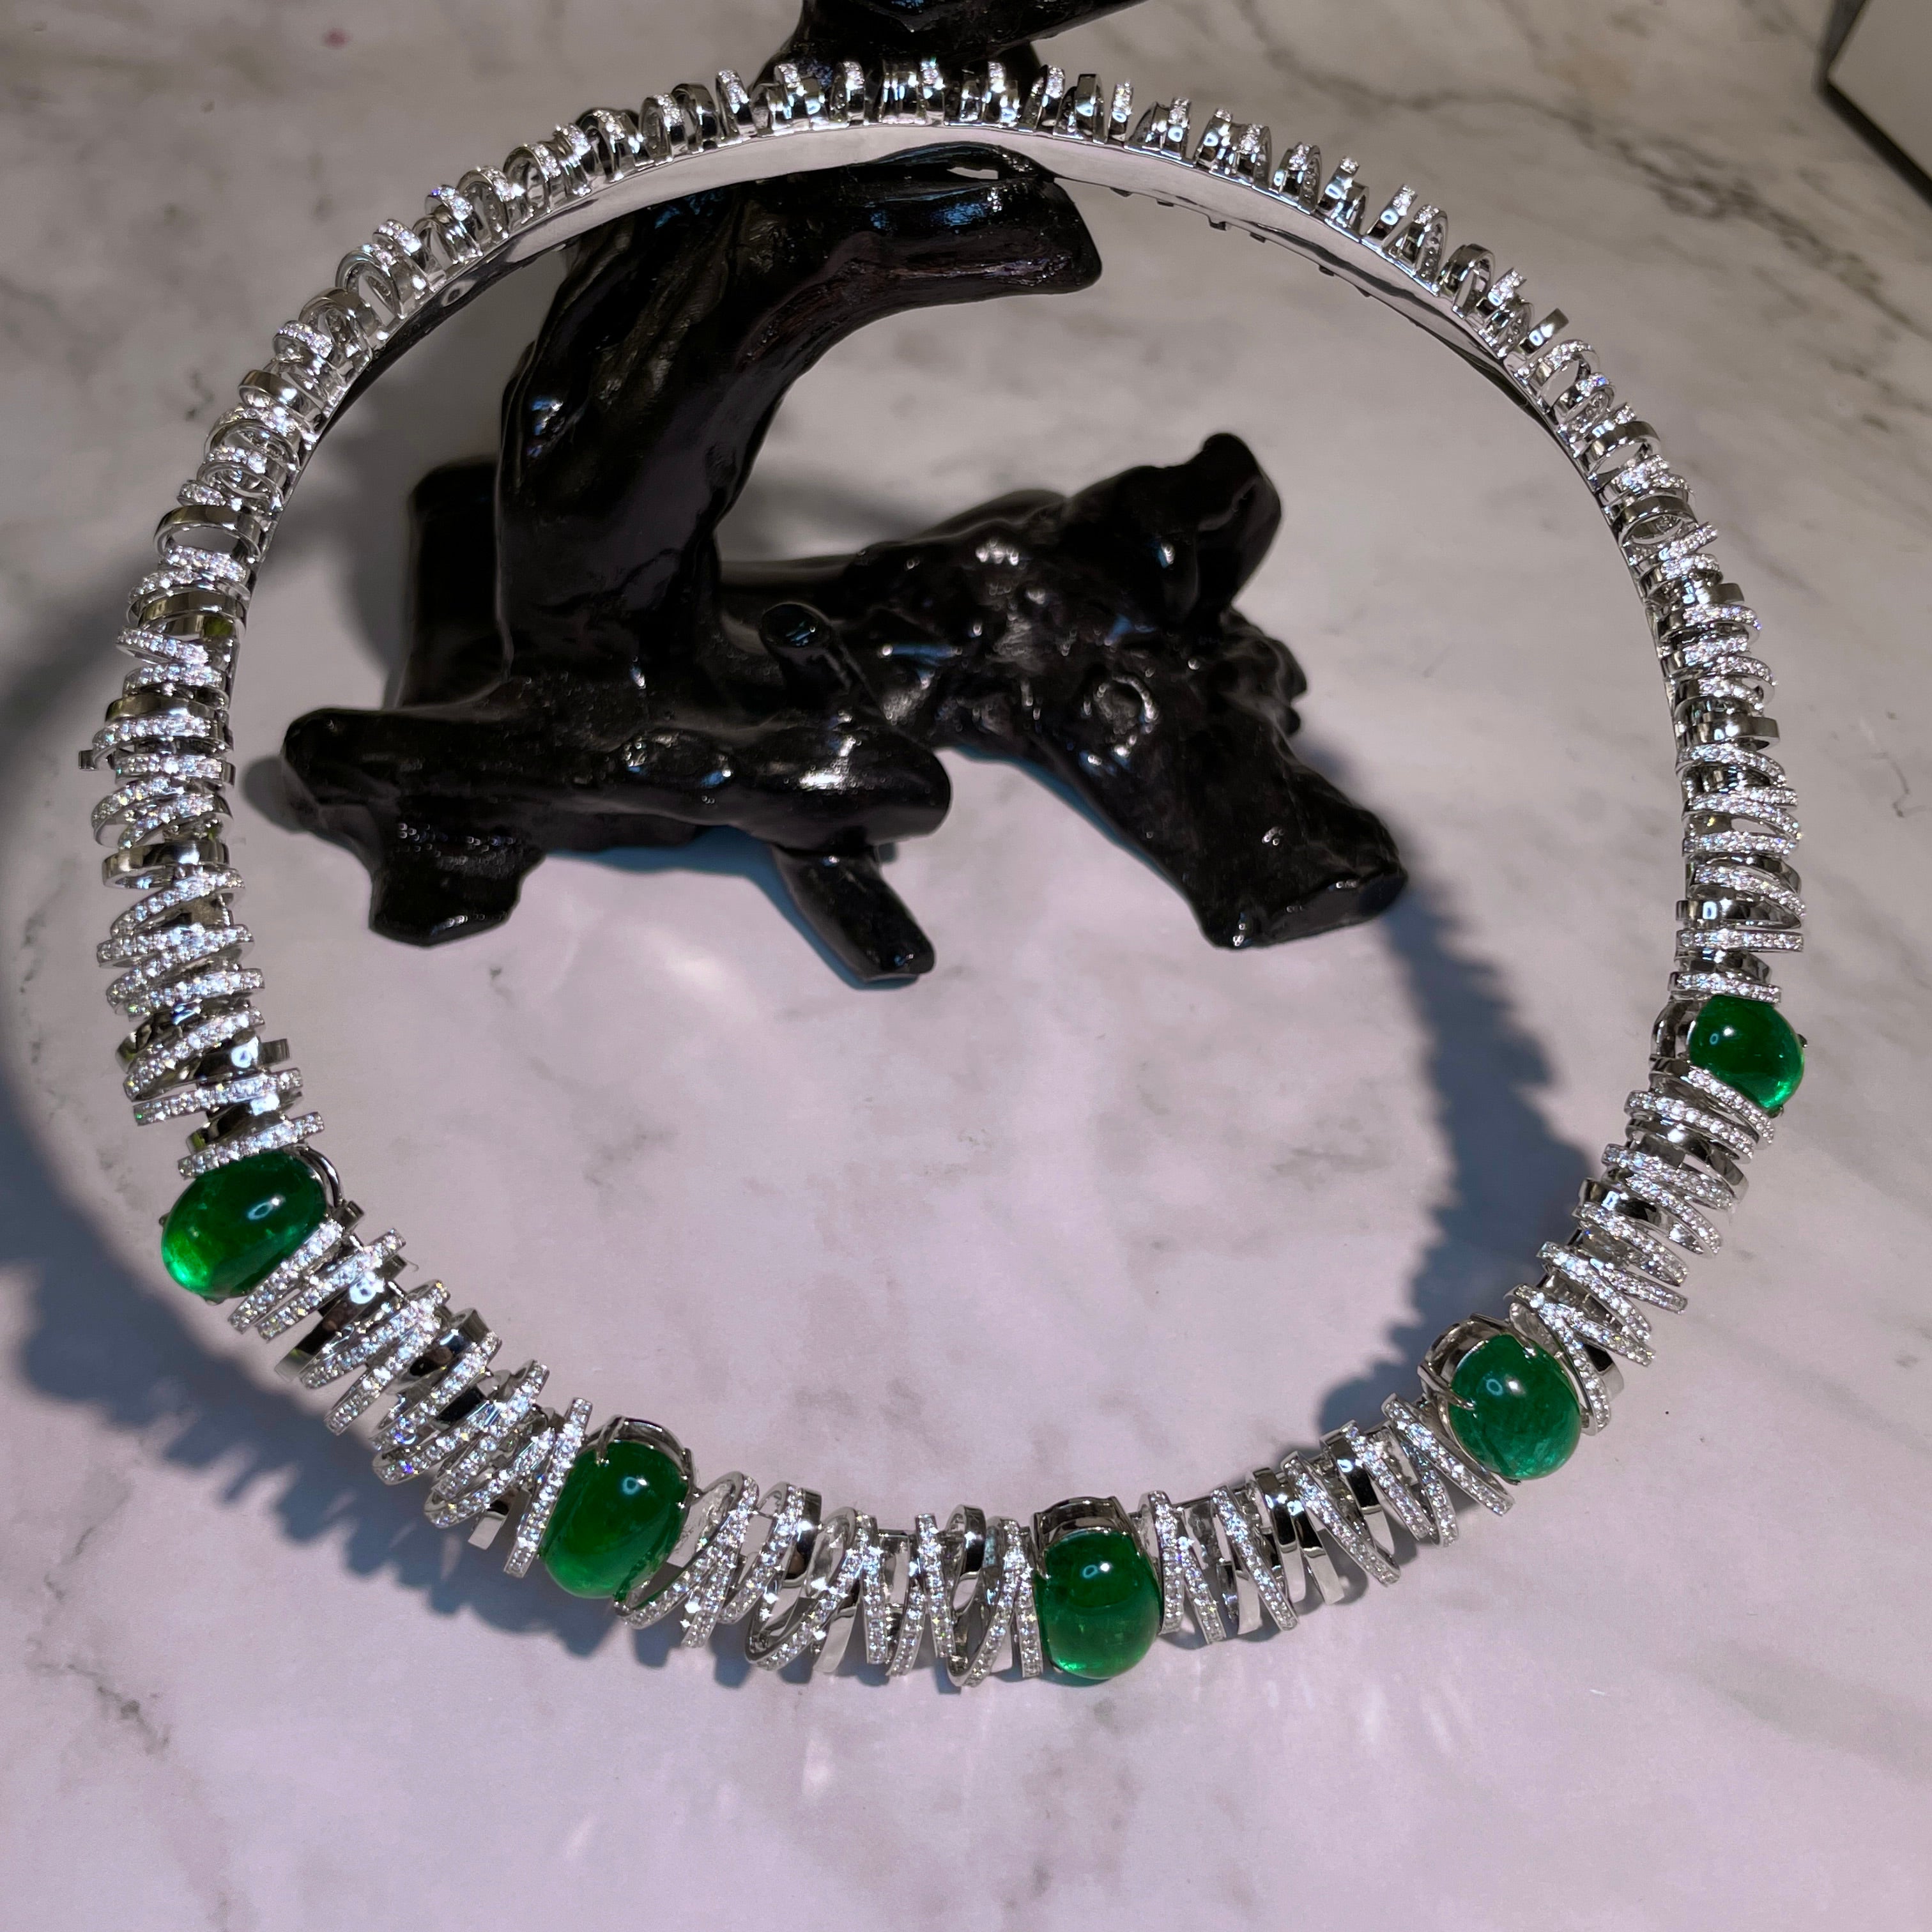 This is a statement piece highlighted with 30 carats of Muzo Green Emerald and 7.2 carats of high quality natural Diamond. This necklace is inspired by the bird nest stadium and it has a matching diamond bangle. If you love this design and wish to